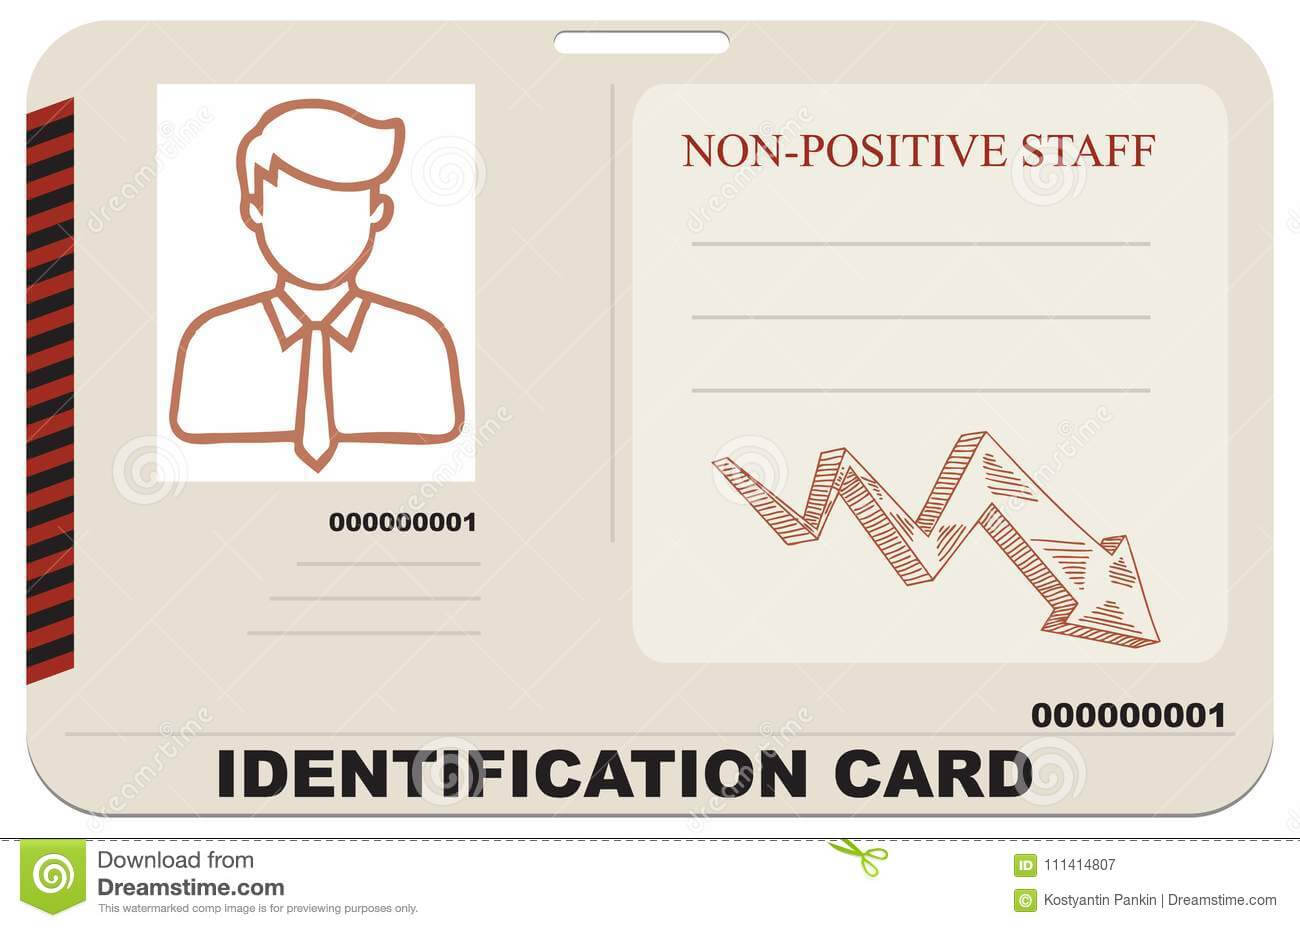 Identification Card For Non Positive Staff Stock Vector With Mi6 Id Card Template